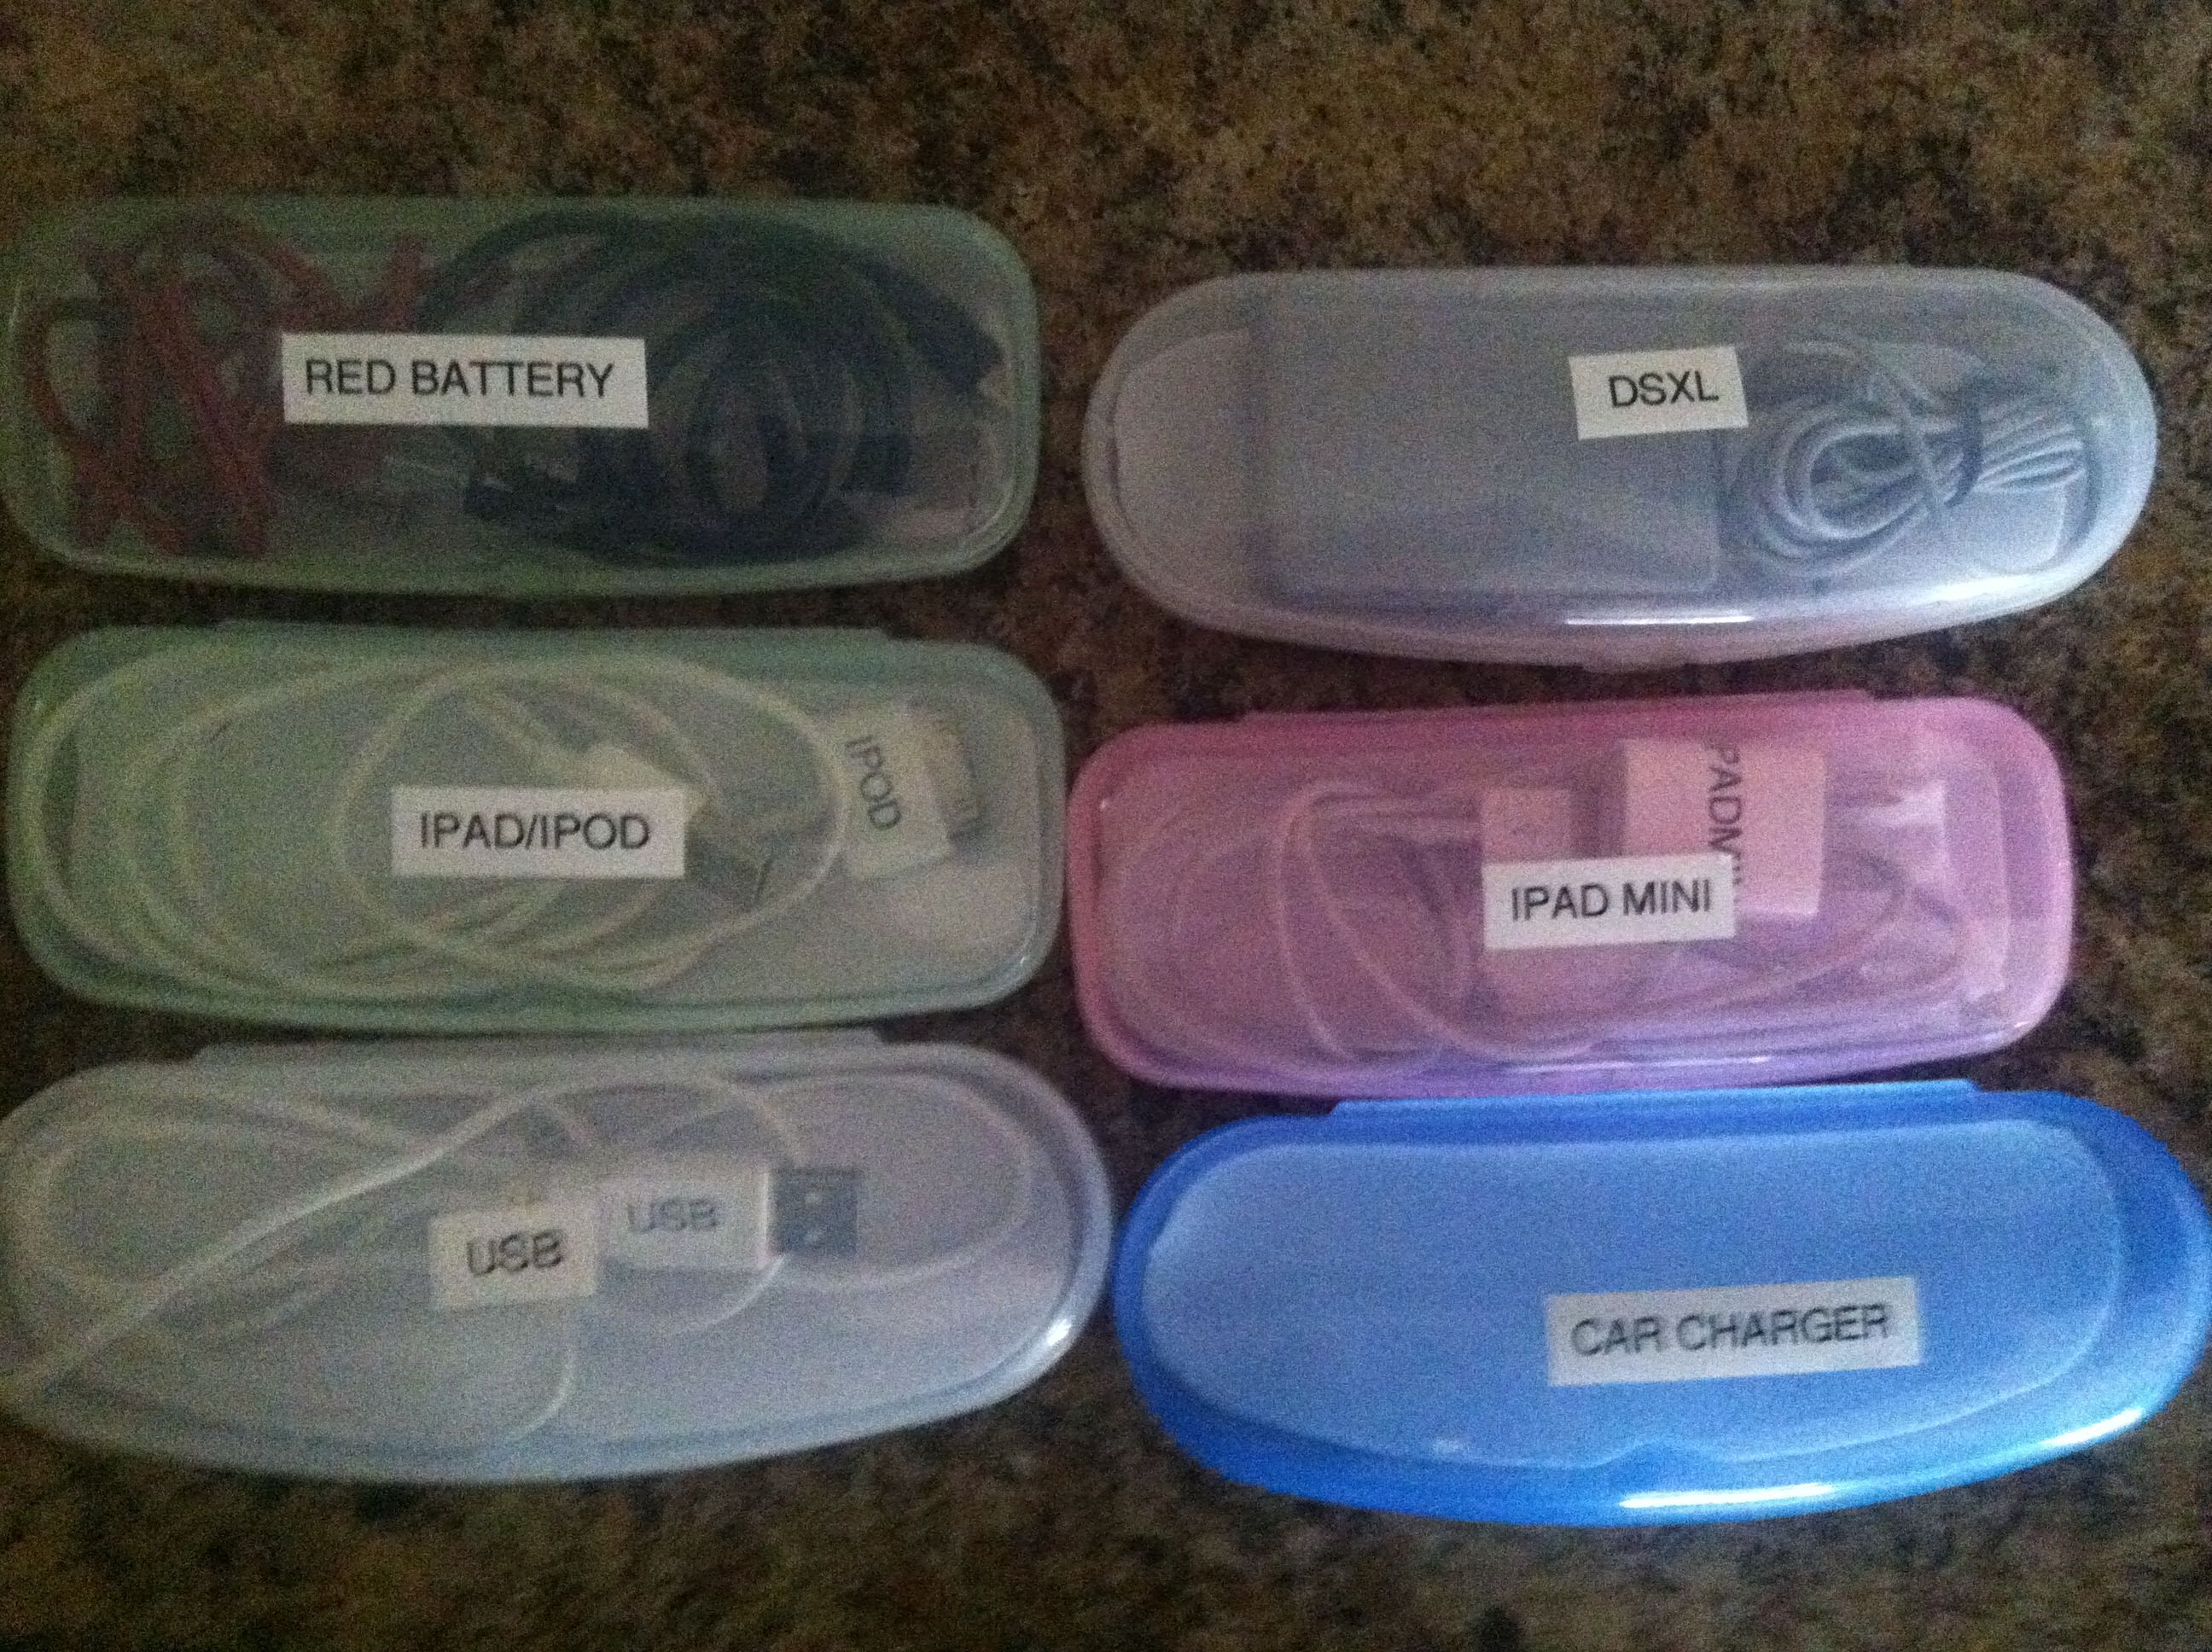 Someone pinned this… Dollar store eye glass cases for our roadtrip! Thanks :)